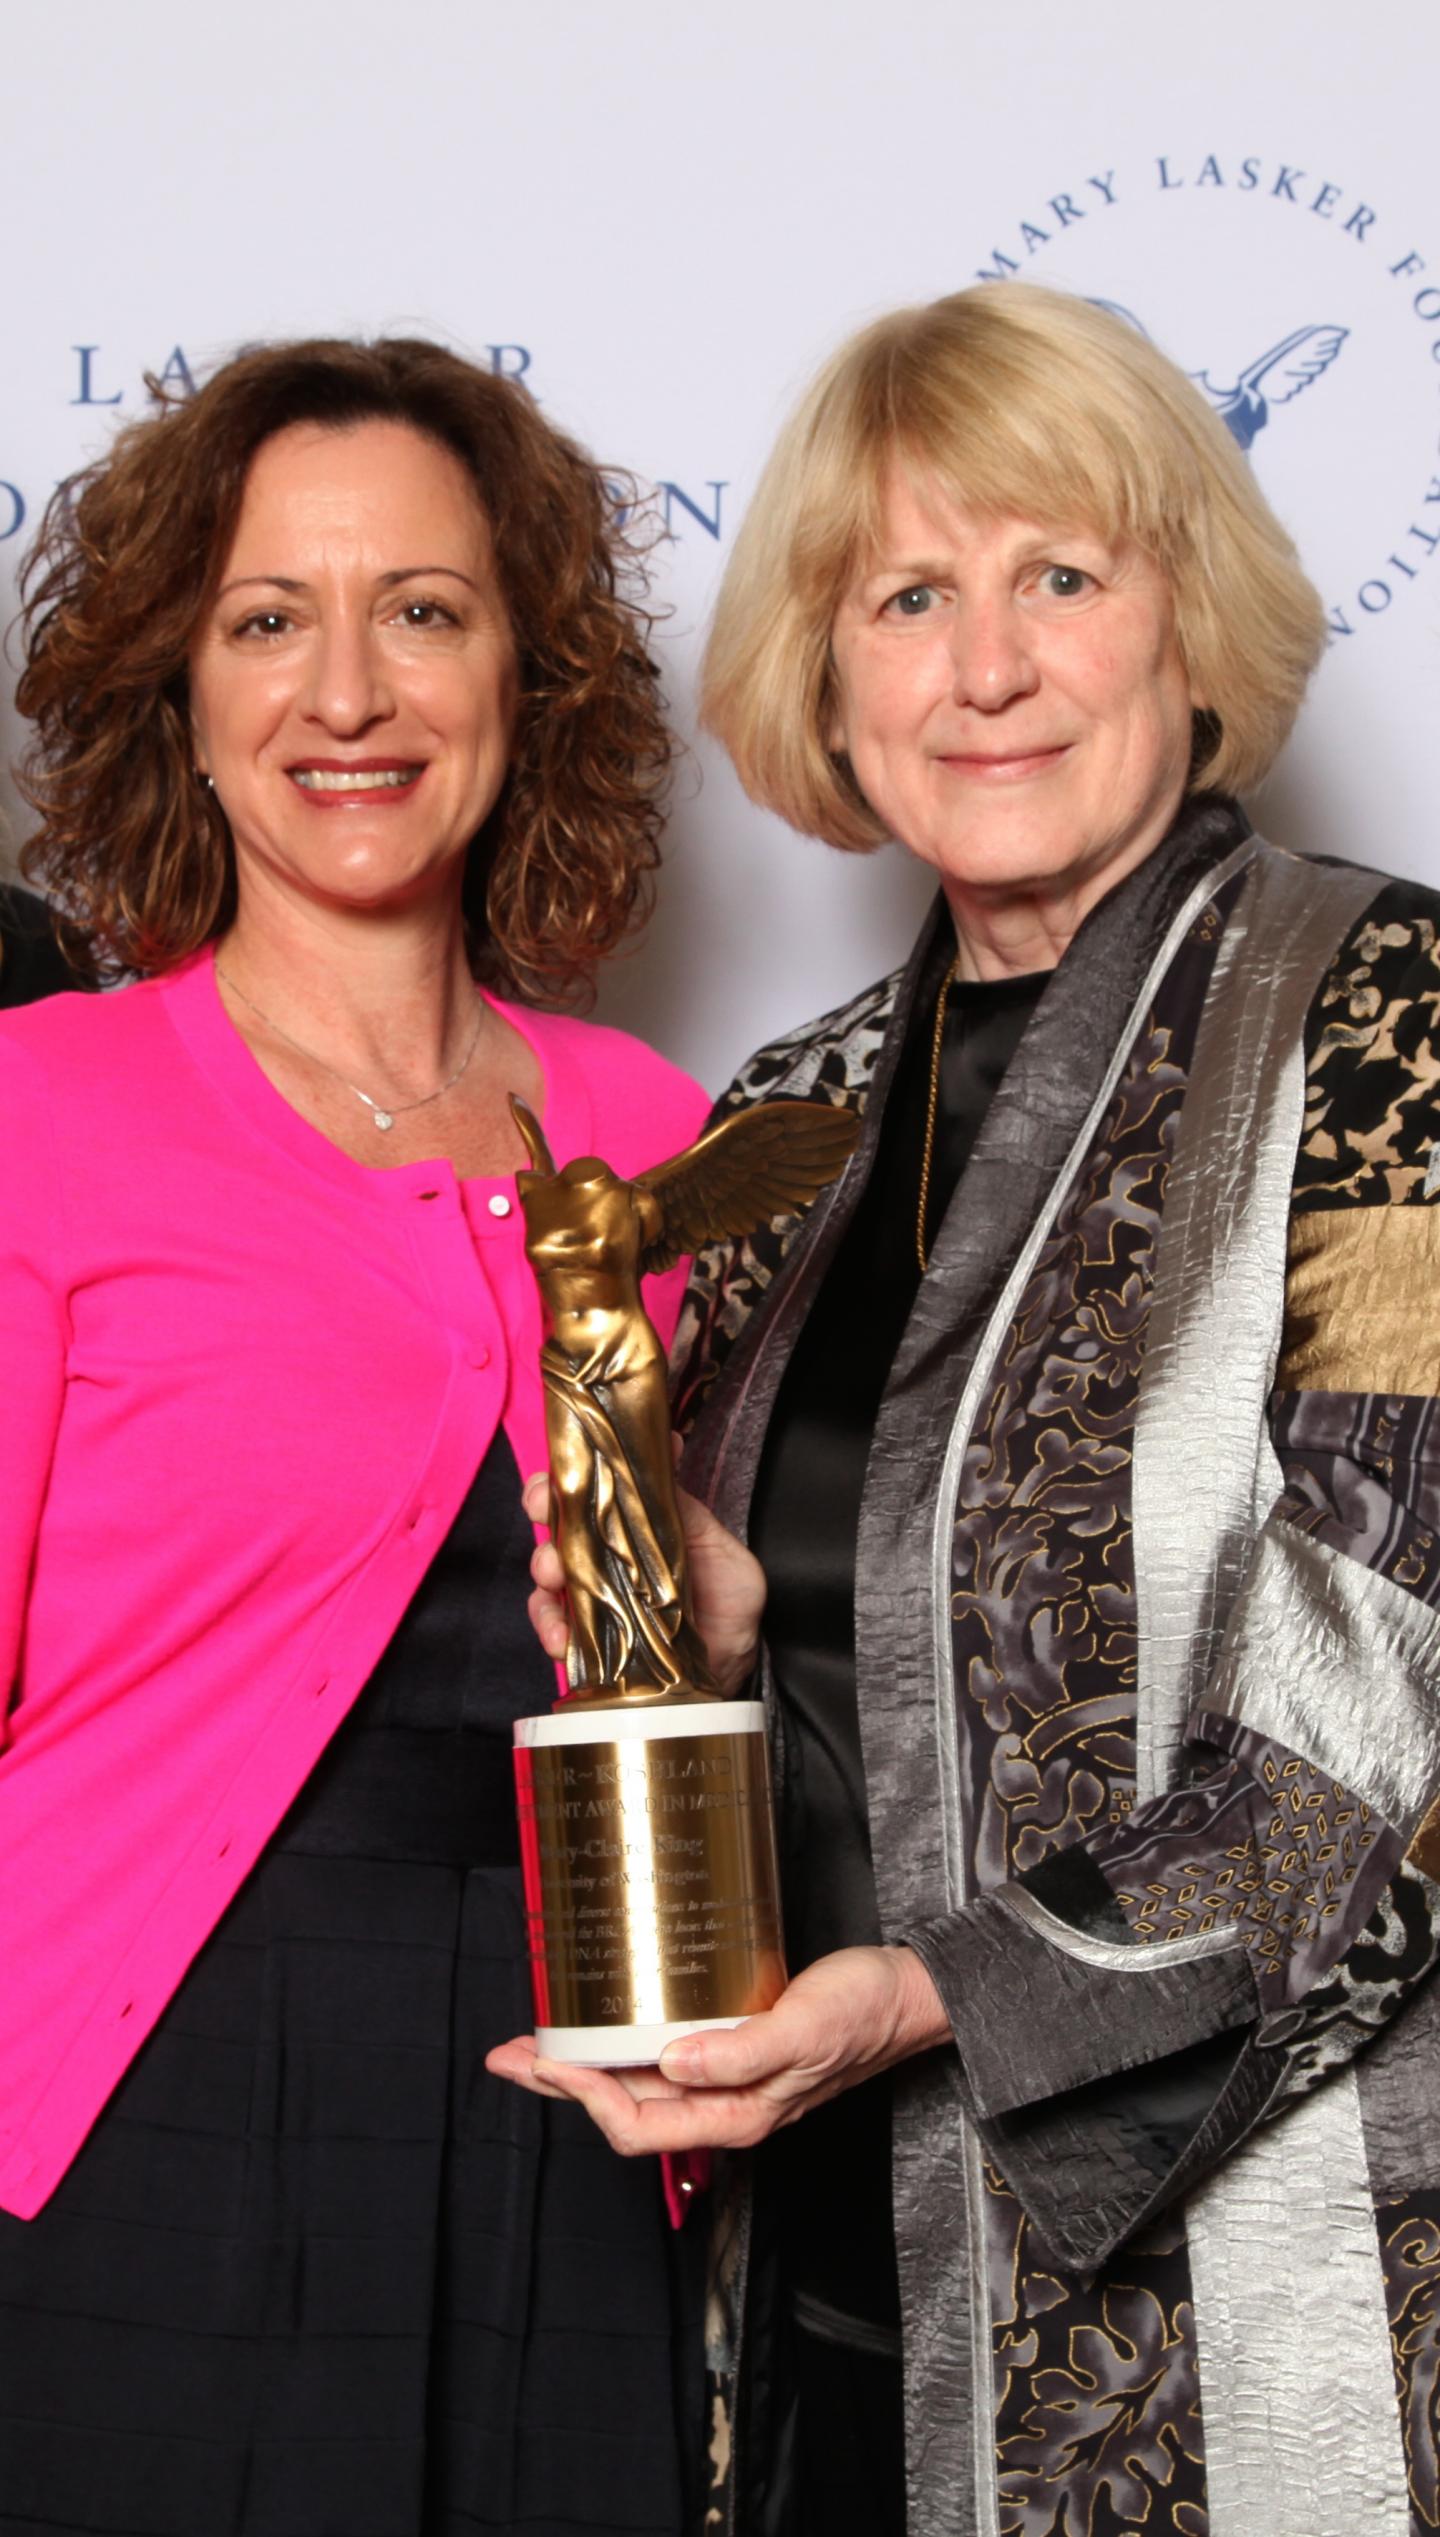 Karen Avraham and Mary-Claire King